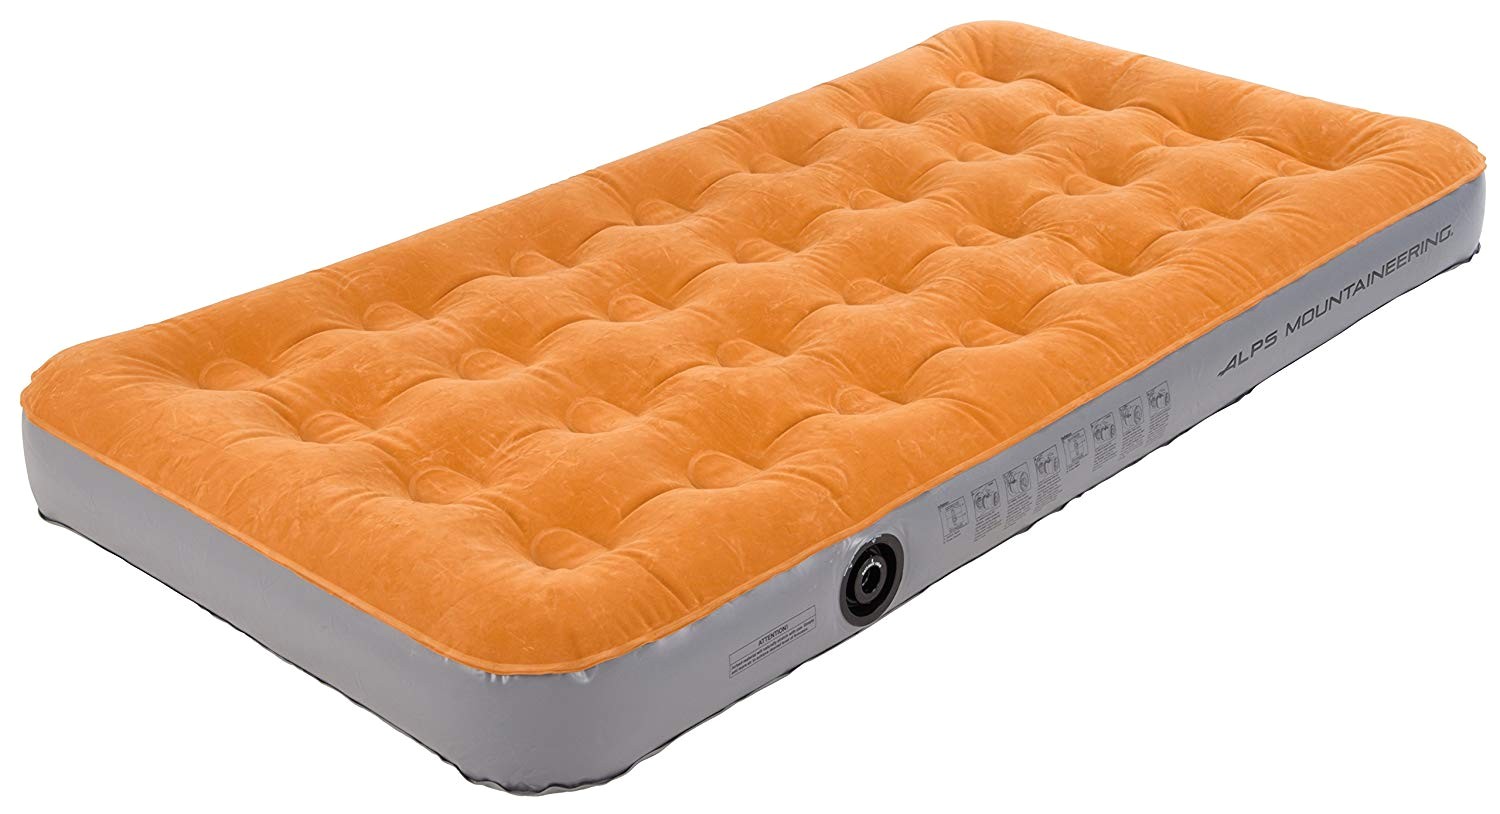 puncture proof air mattresses do they exist